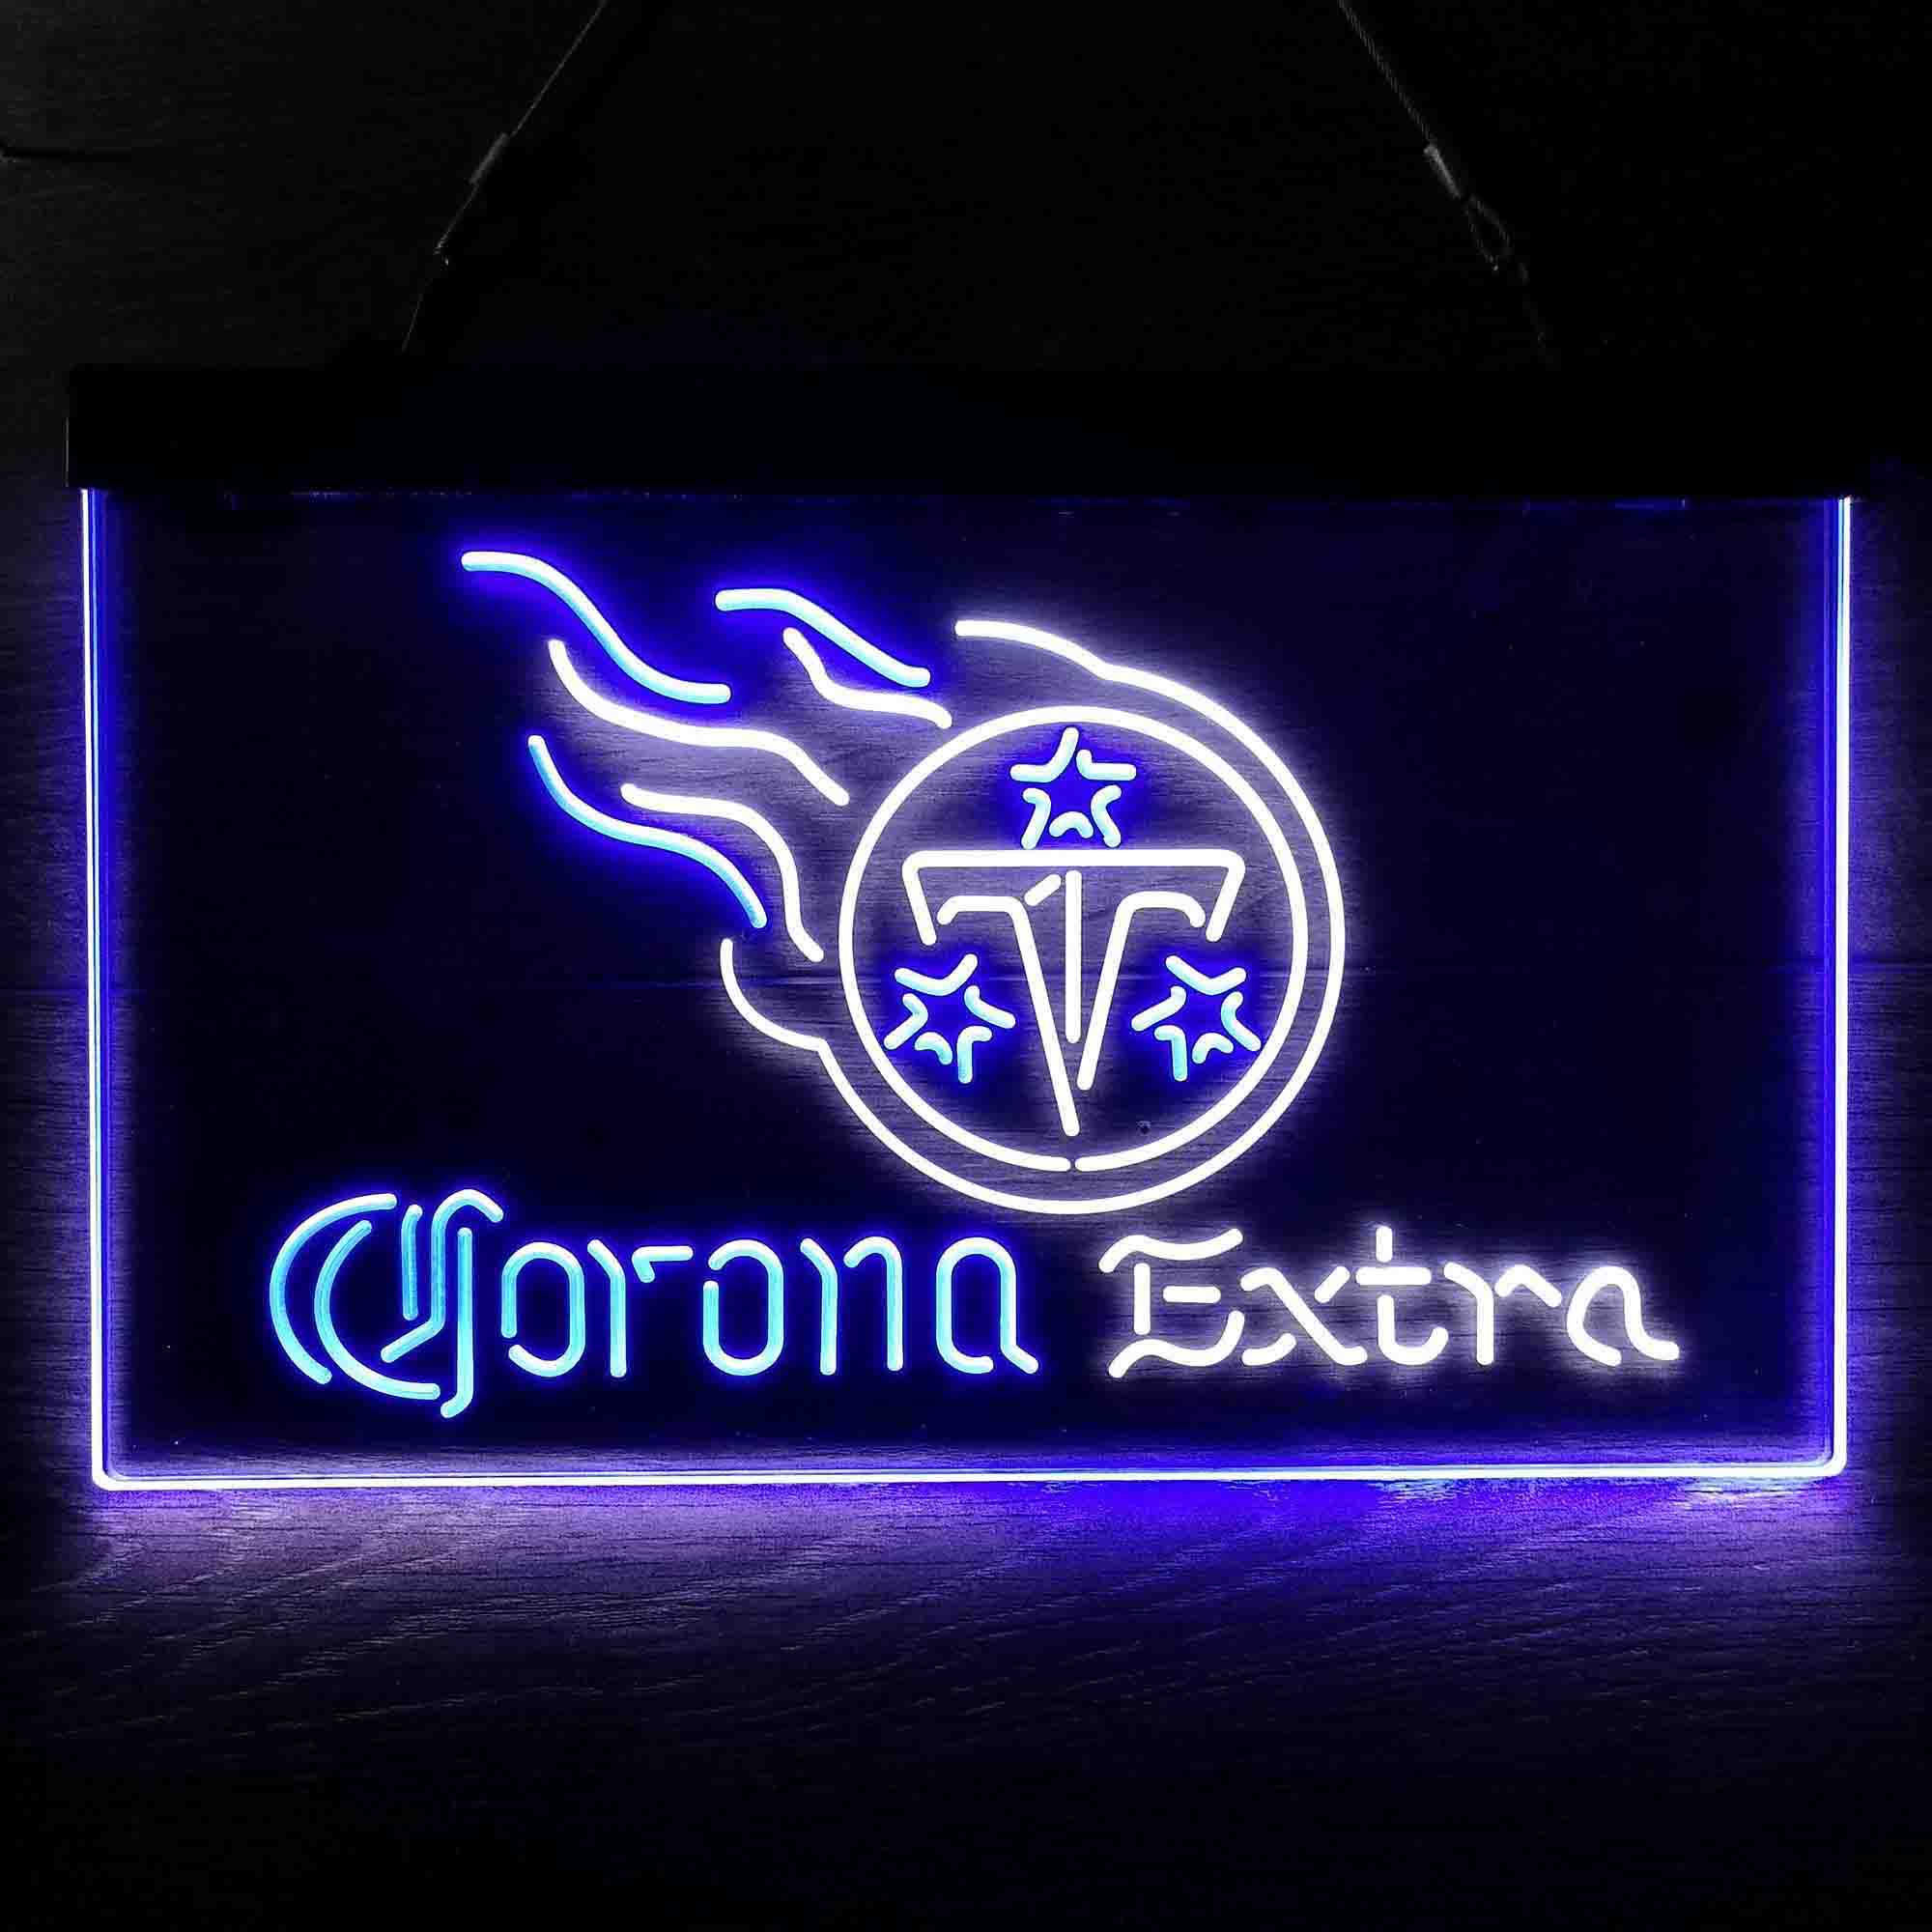 Corona Extra Bar Tennessee Titans Est. 1960 LED Neon Sign